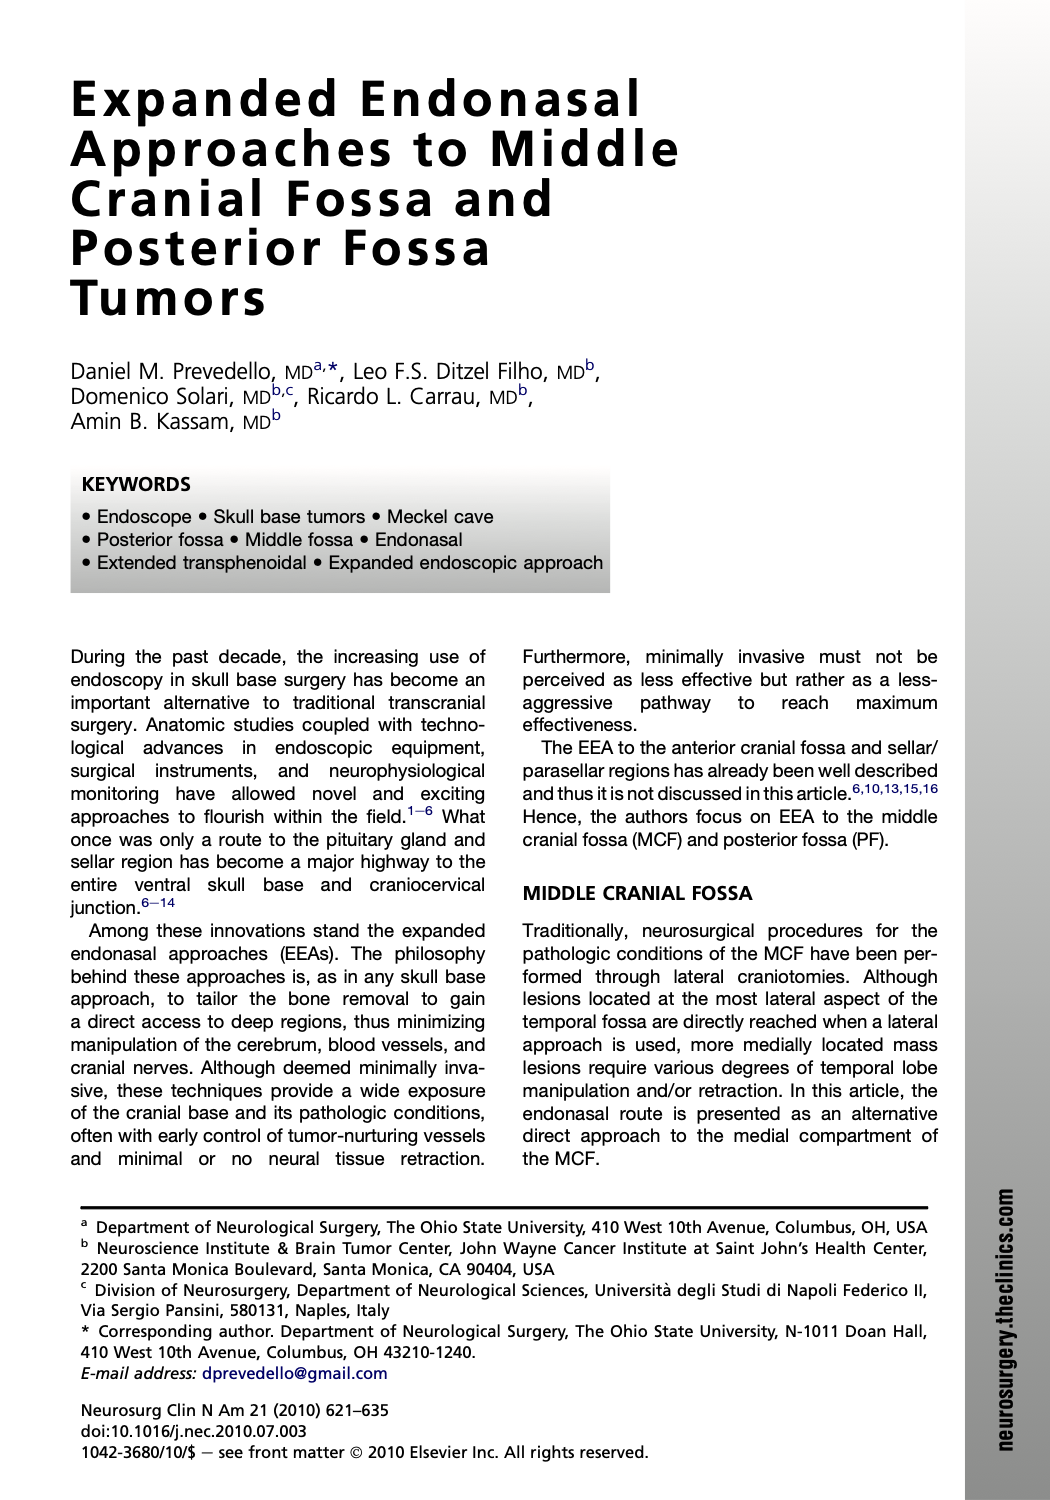 Expanded Endonasal Approaches to Middle Cranial Fossa and Posterior Fossa Tumors